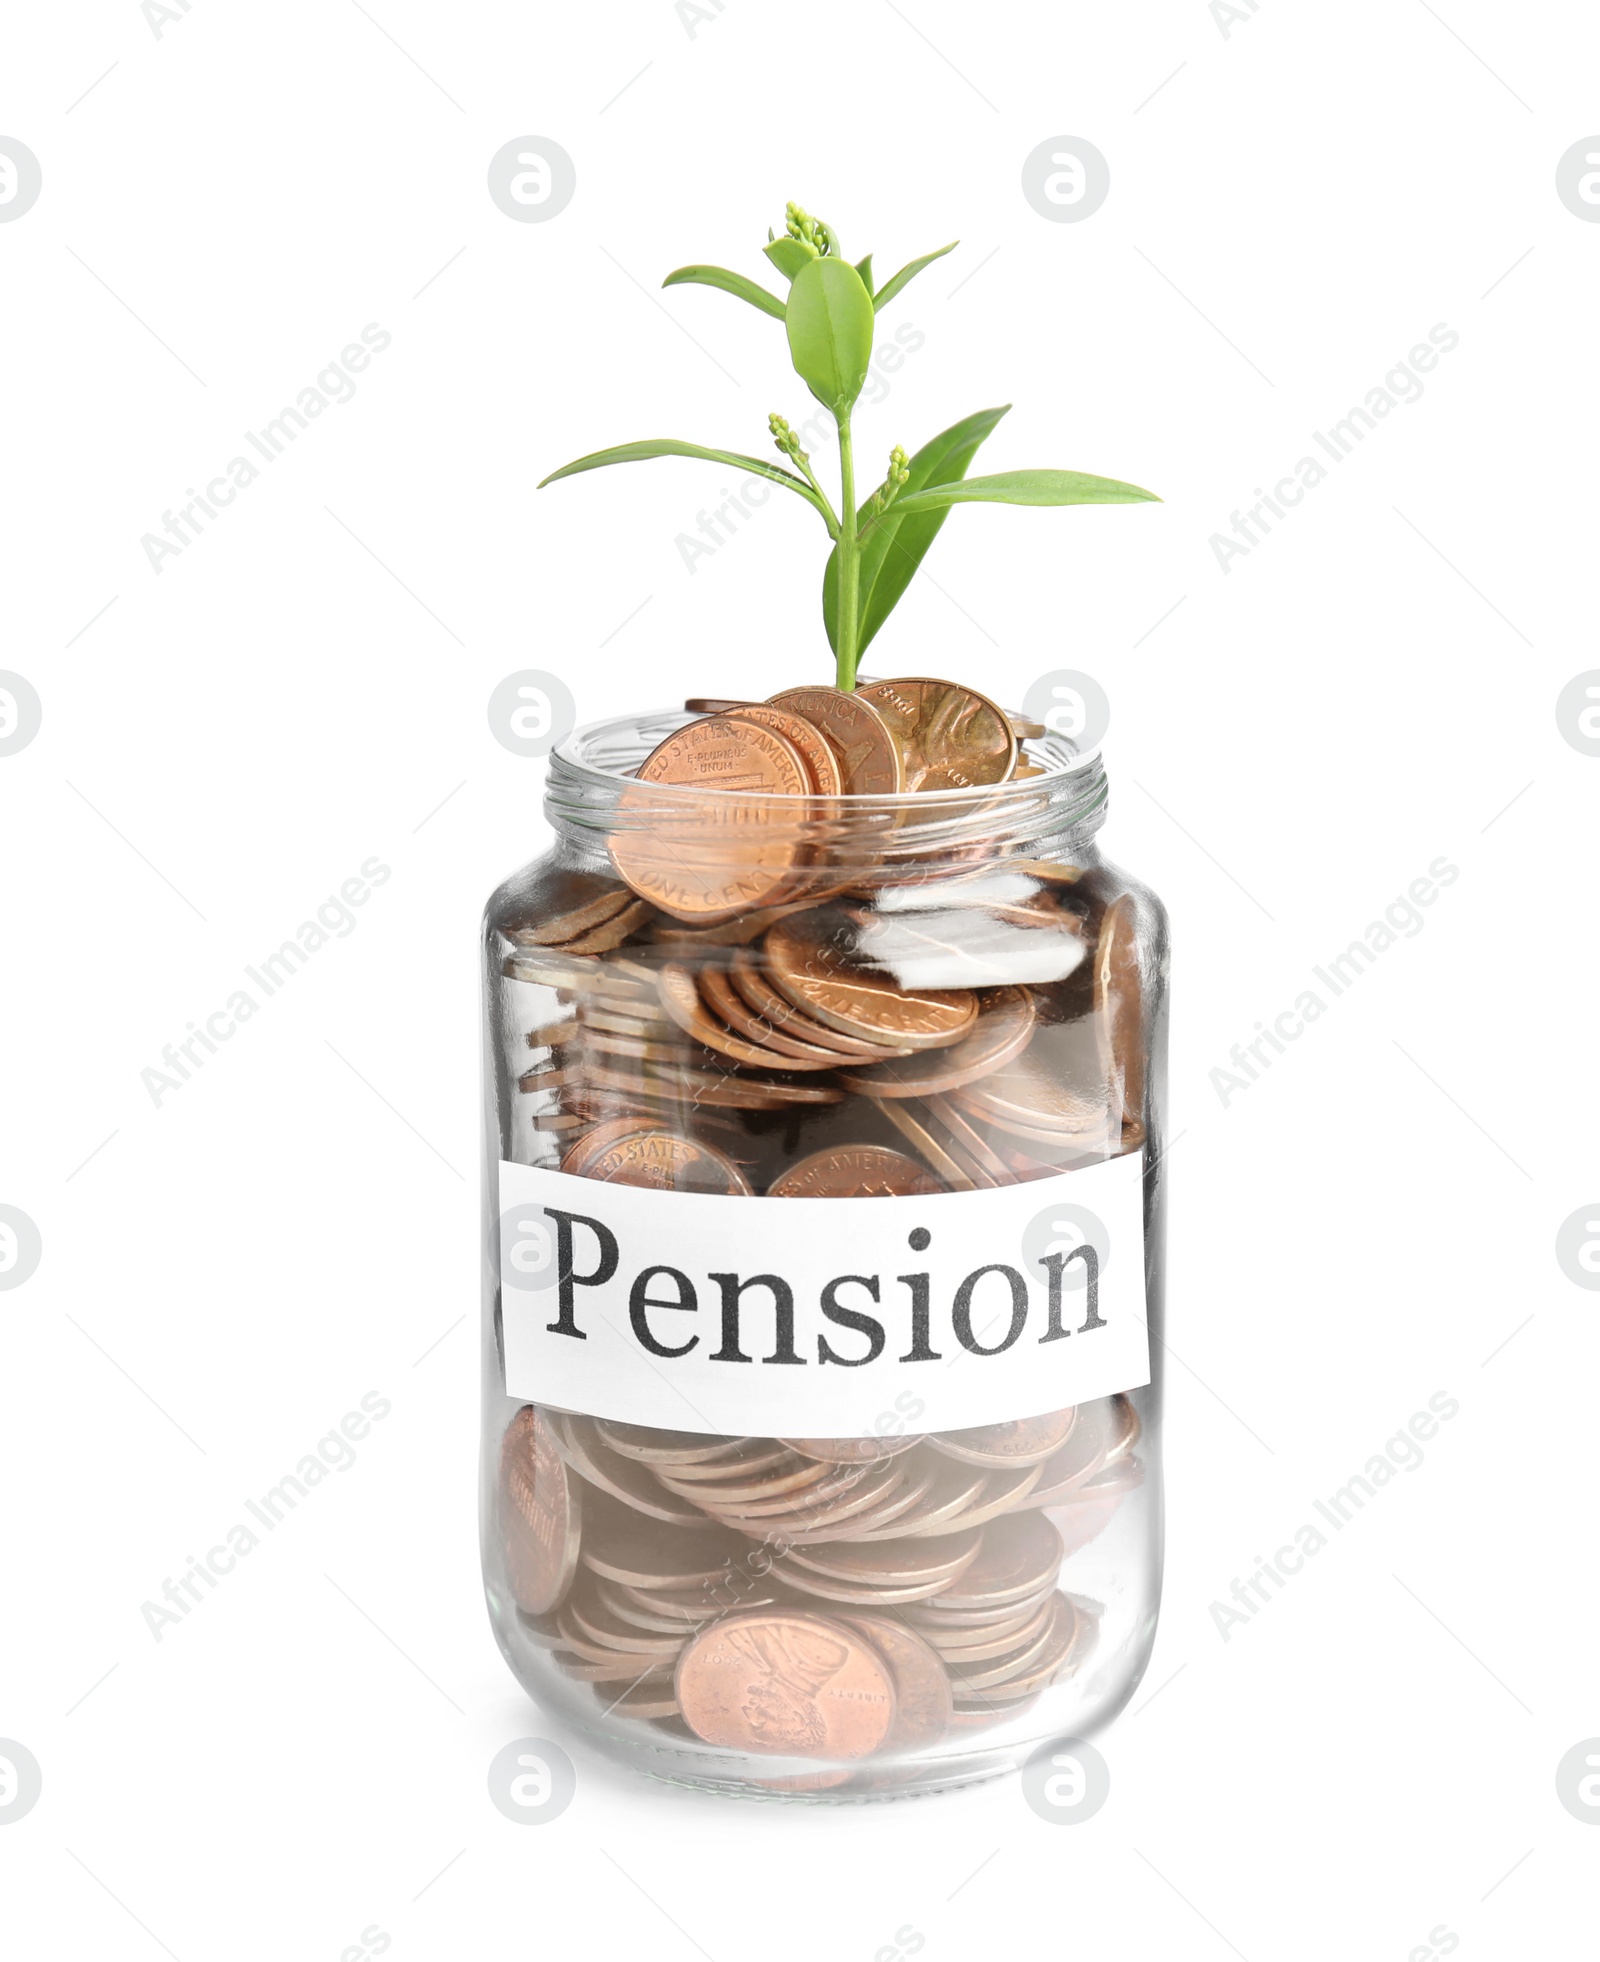 Photo of Glass jar with label PENSION, coins and green plant isolated on white